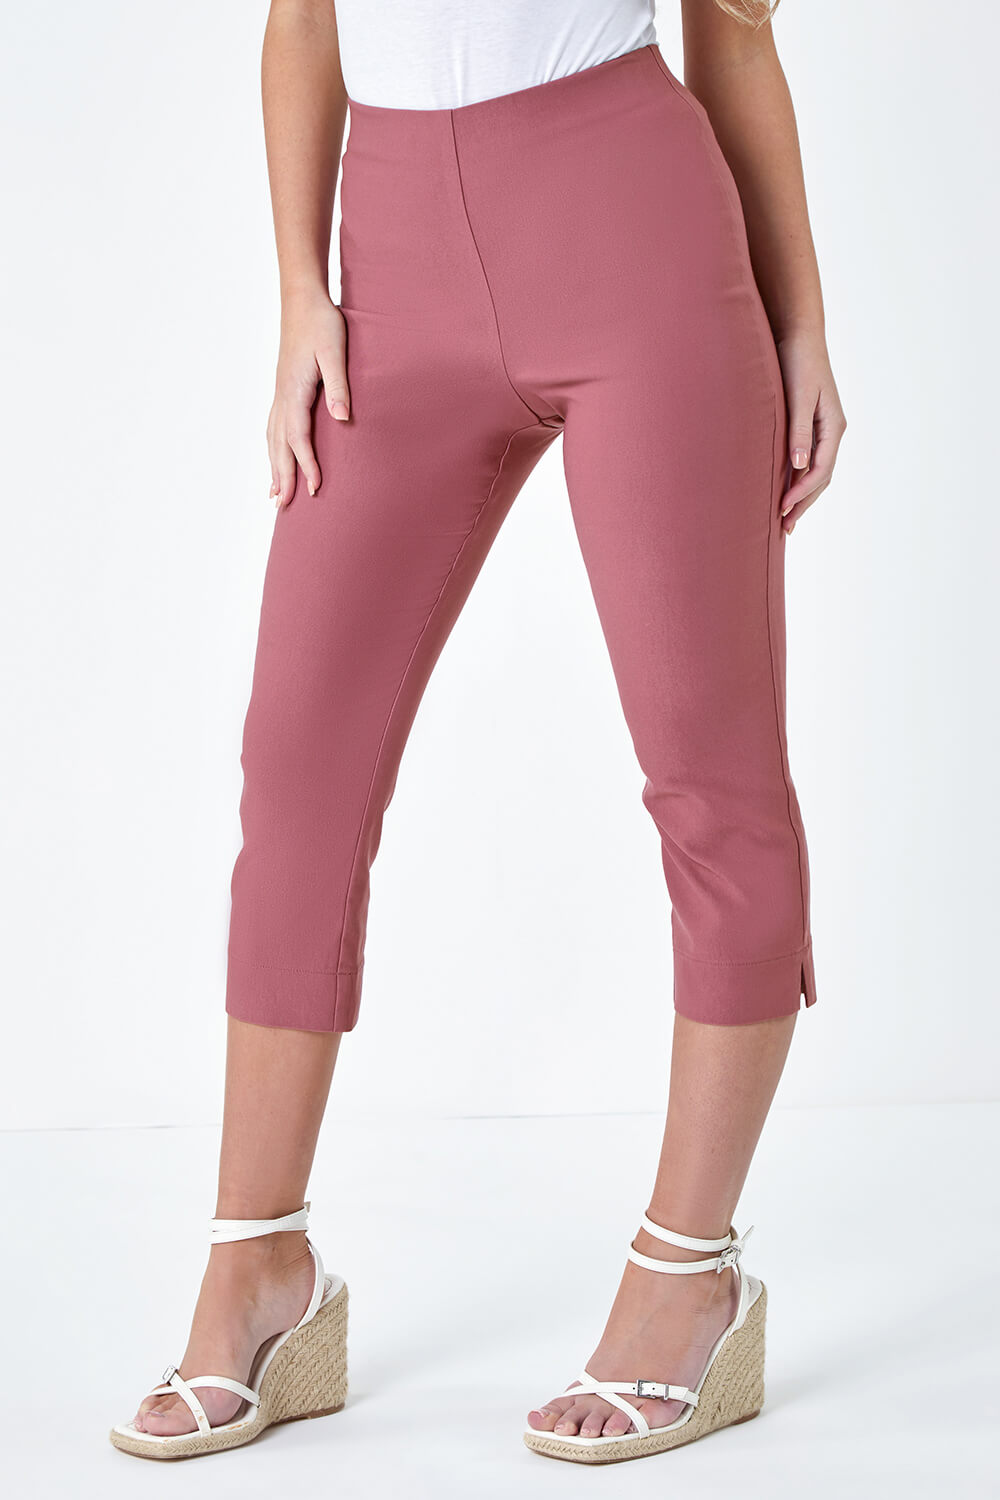 Biscuit Petite Cropped Stretch Trousers, Image 4 of 5